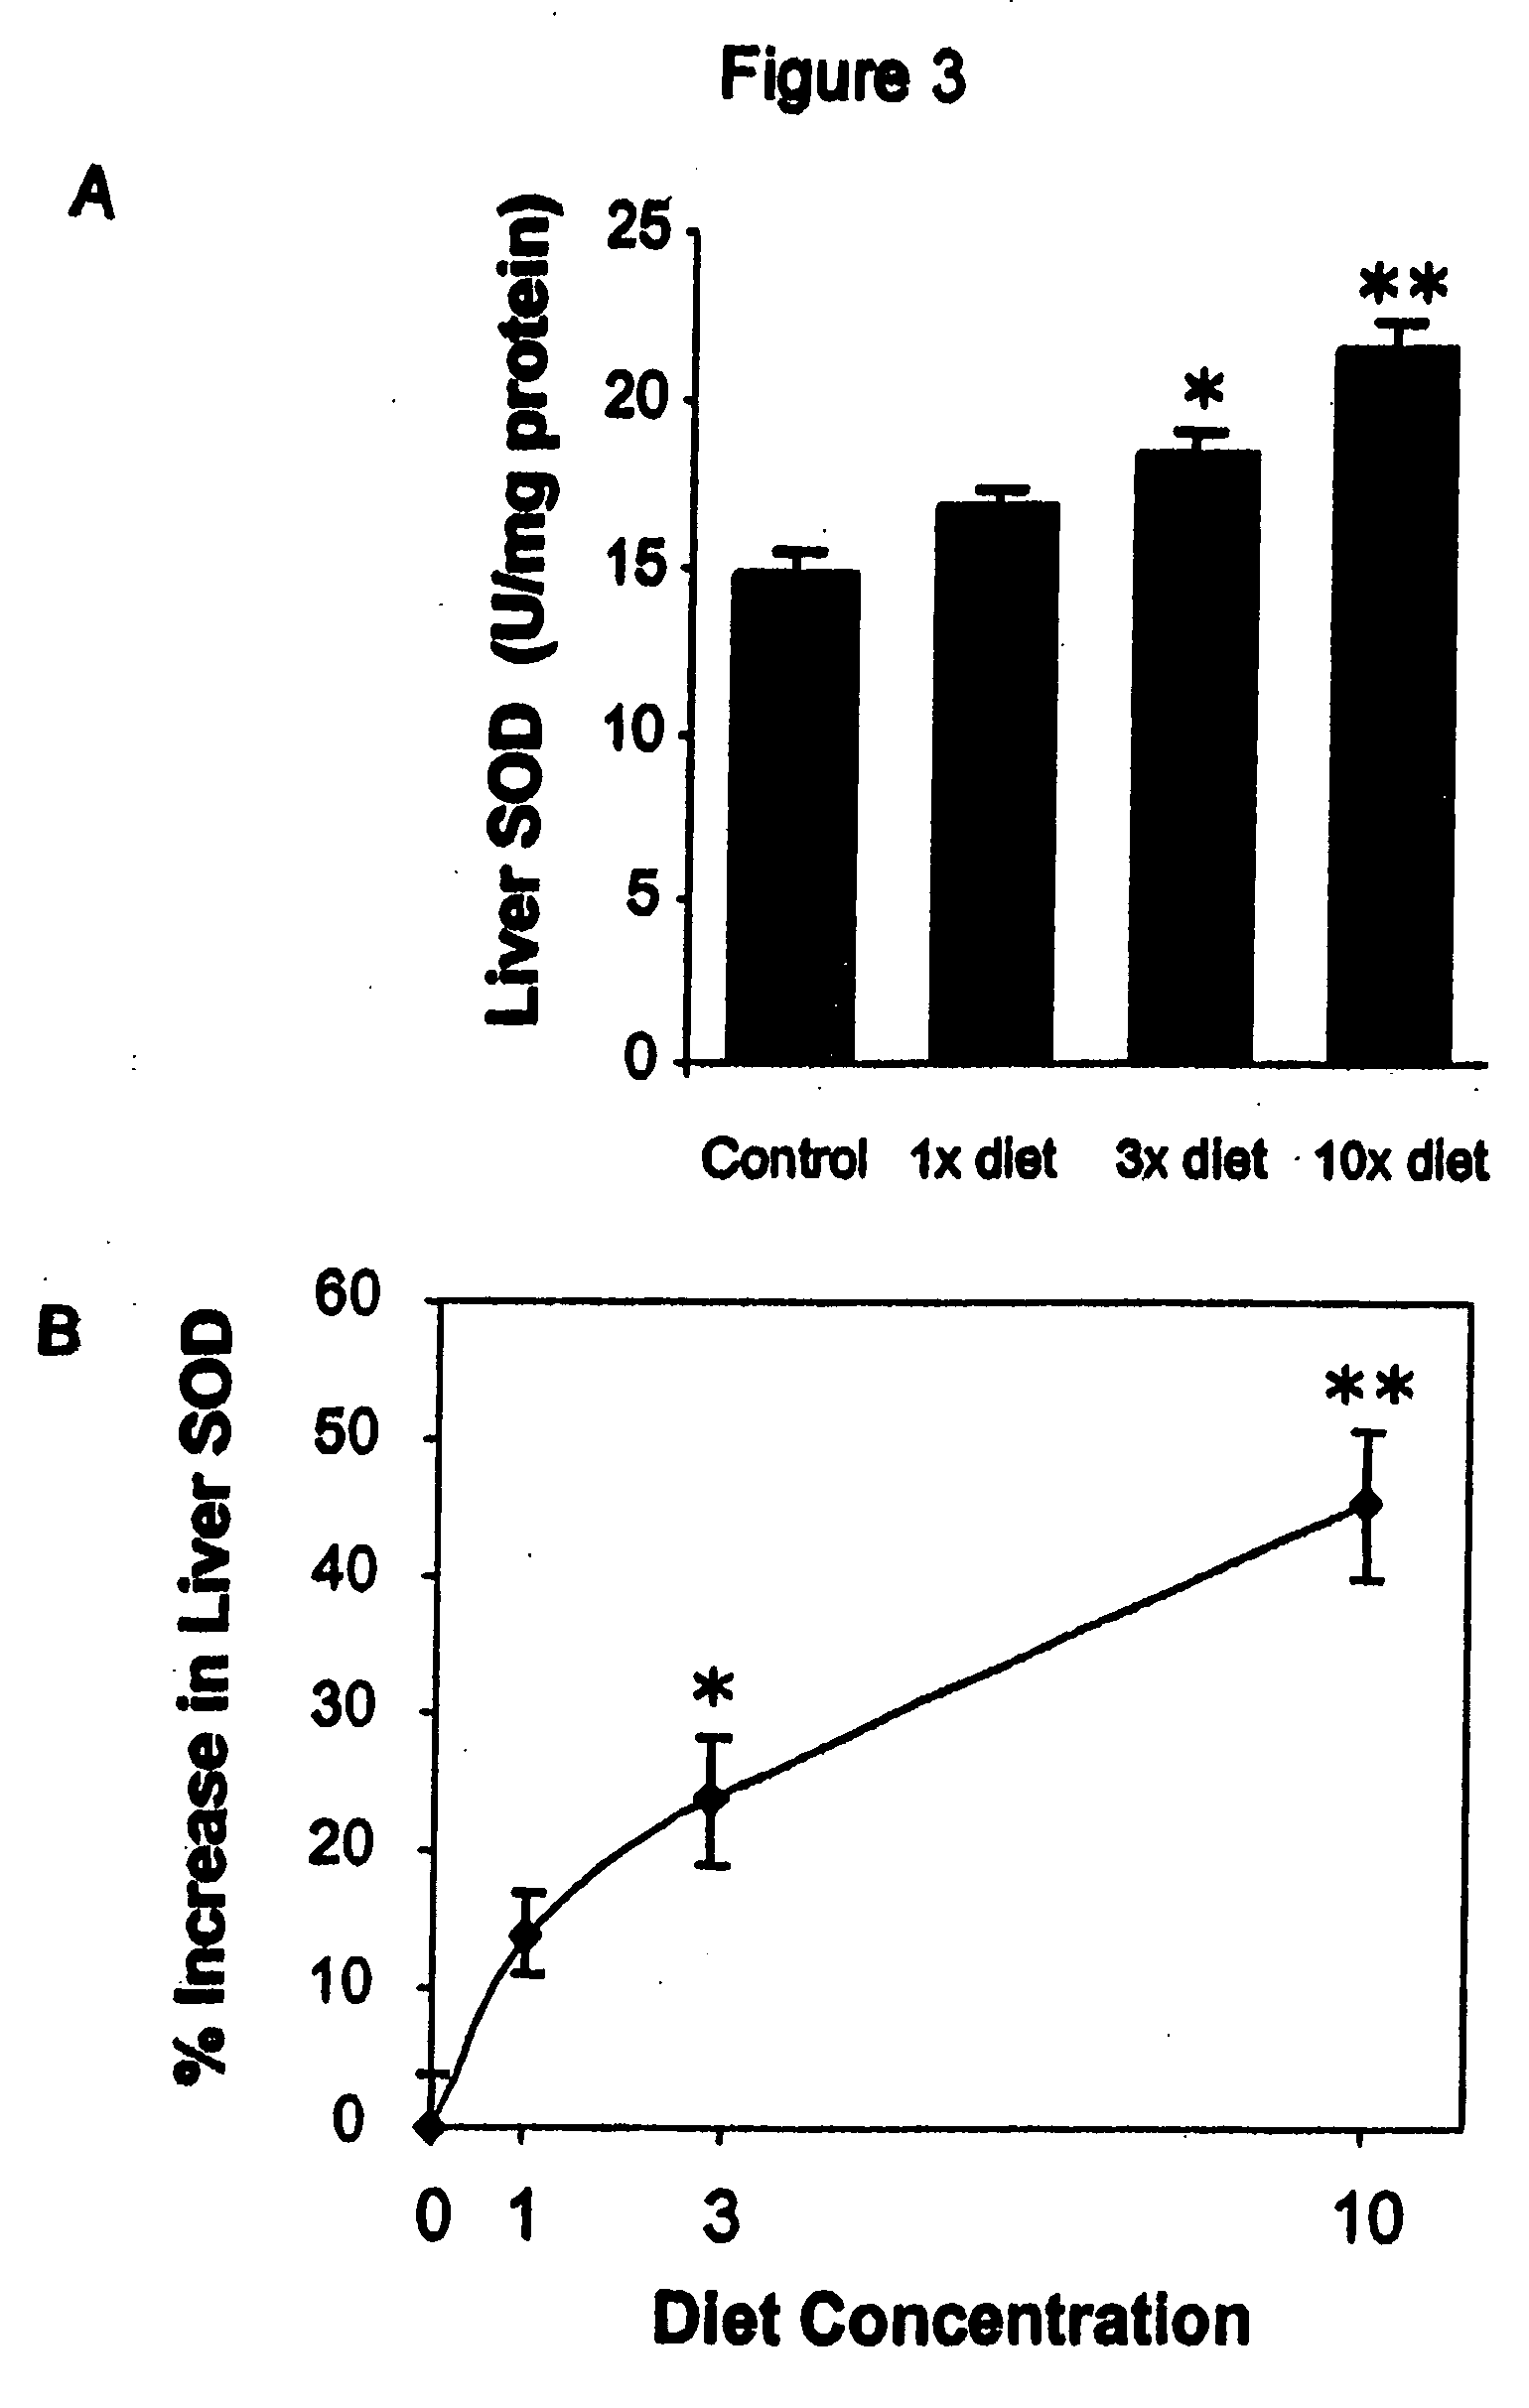 Methods for enhancing antioxidant enzyme activity and reducing C-reactive protein levels